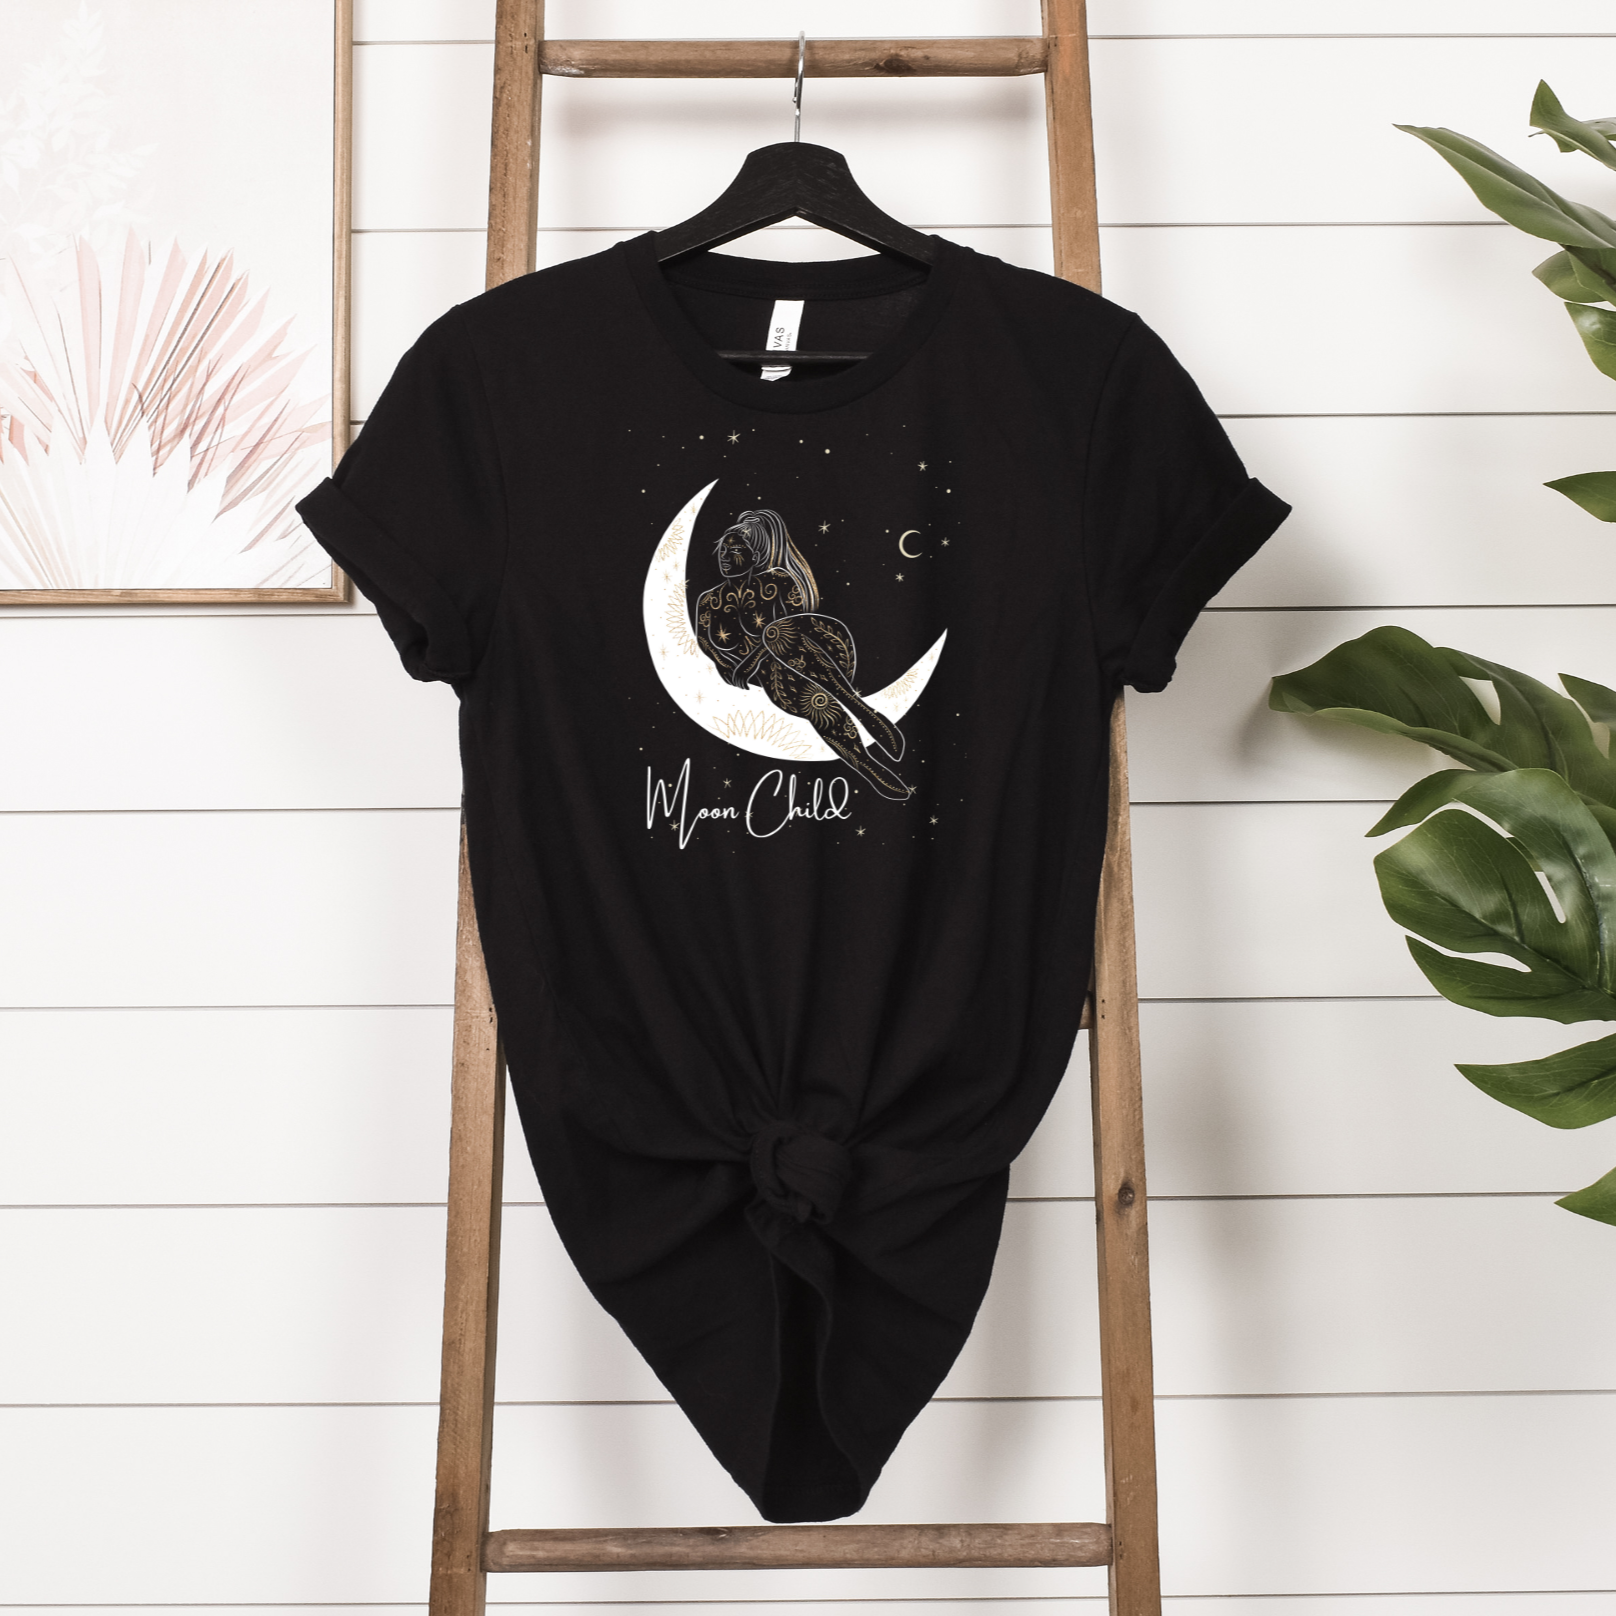 Story of Awakening Lifestyle Community Spirituality Relationships Love Light Meditation Oneness Earth Balance Healing Shop Store Charity Tree Nature Read Write T shirt Tops Tees Clothing Women Horoscope Moon Child Quote Wicca Witch